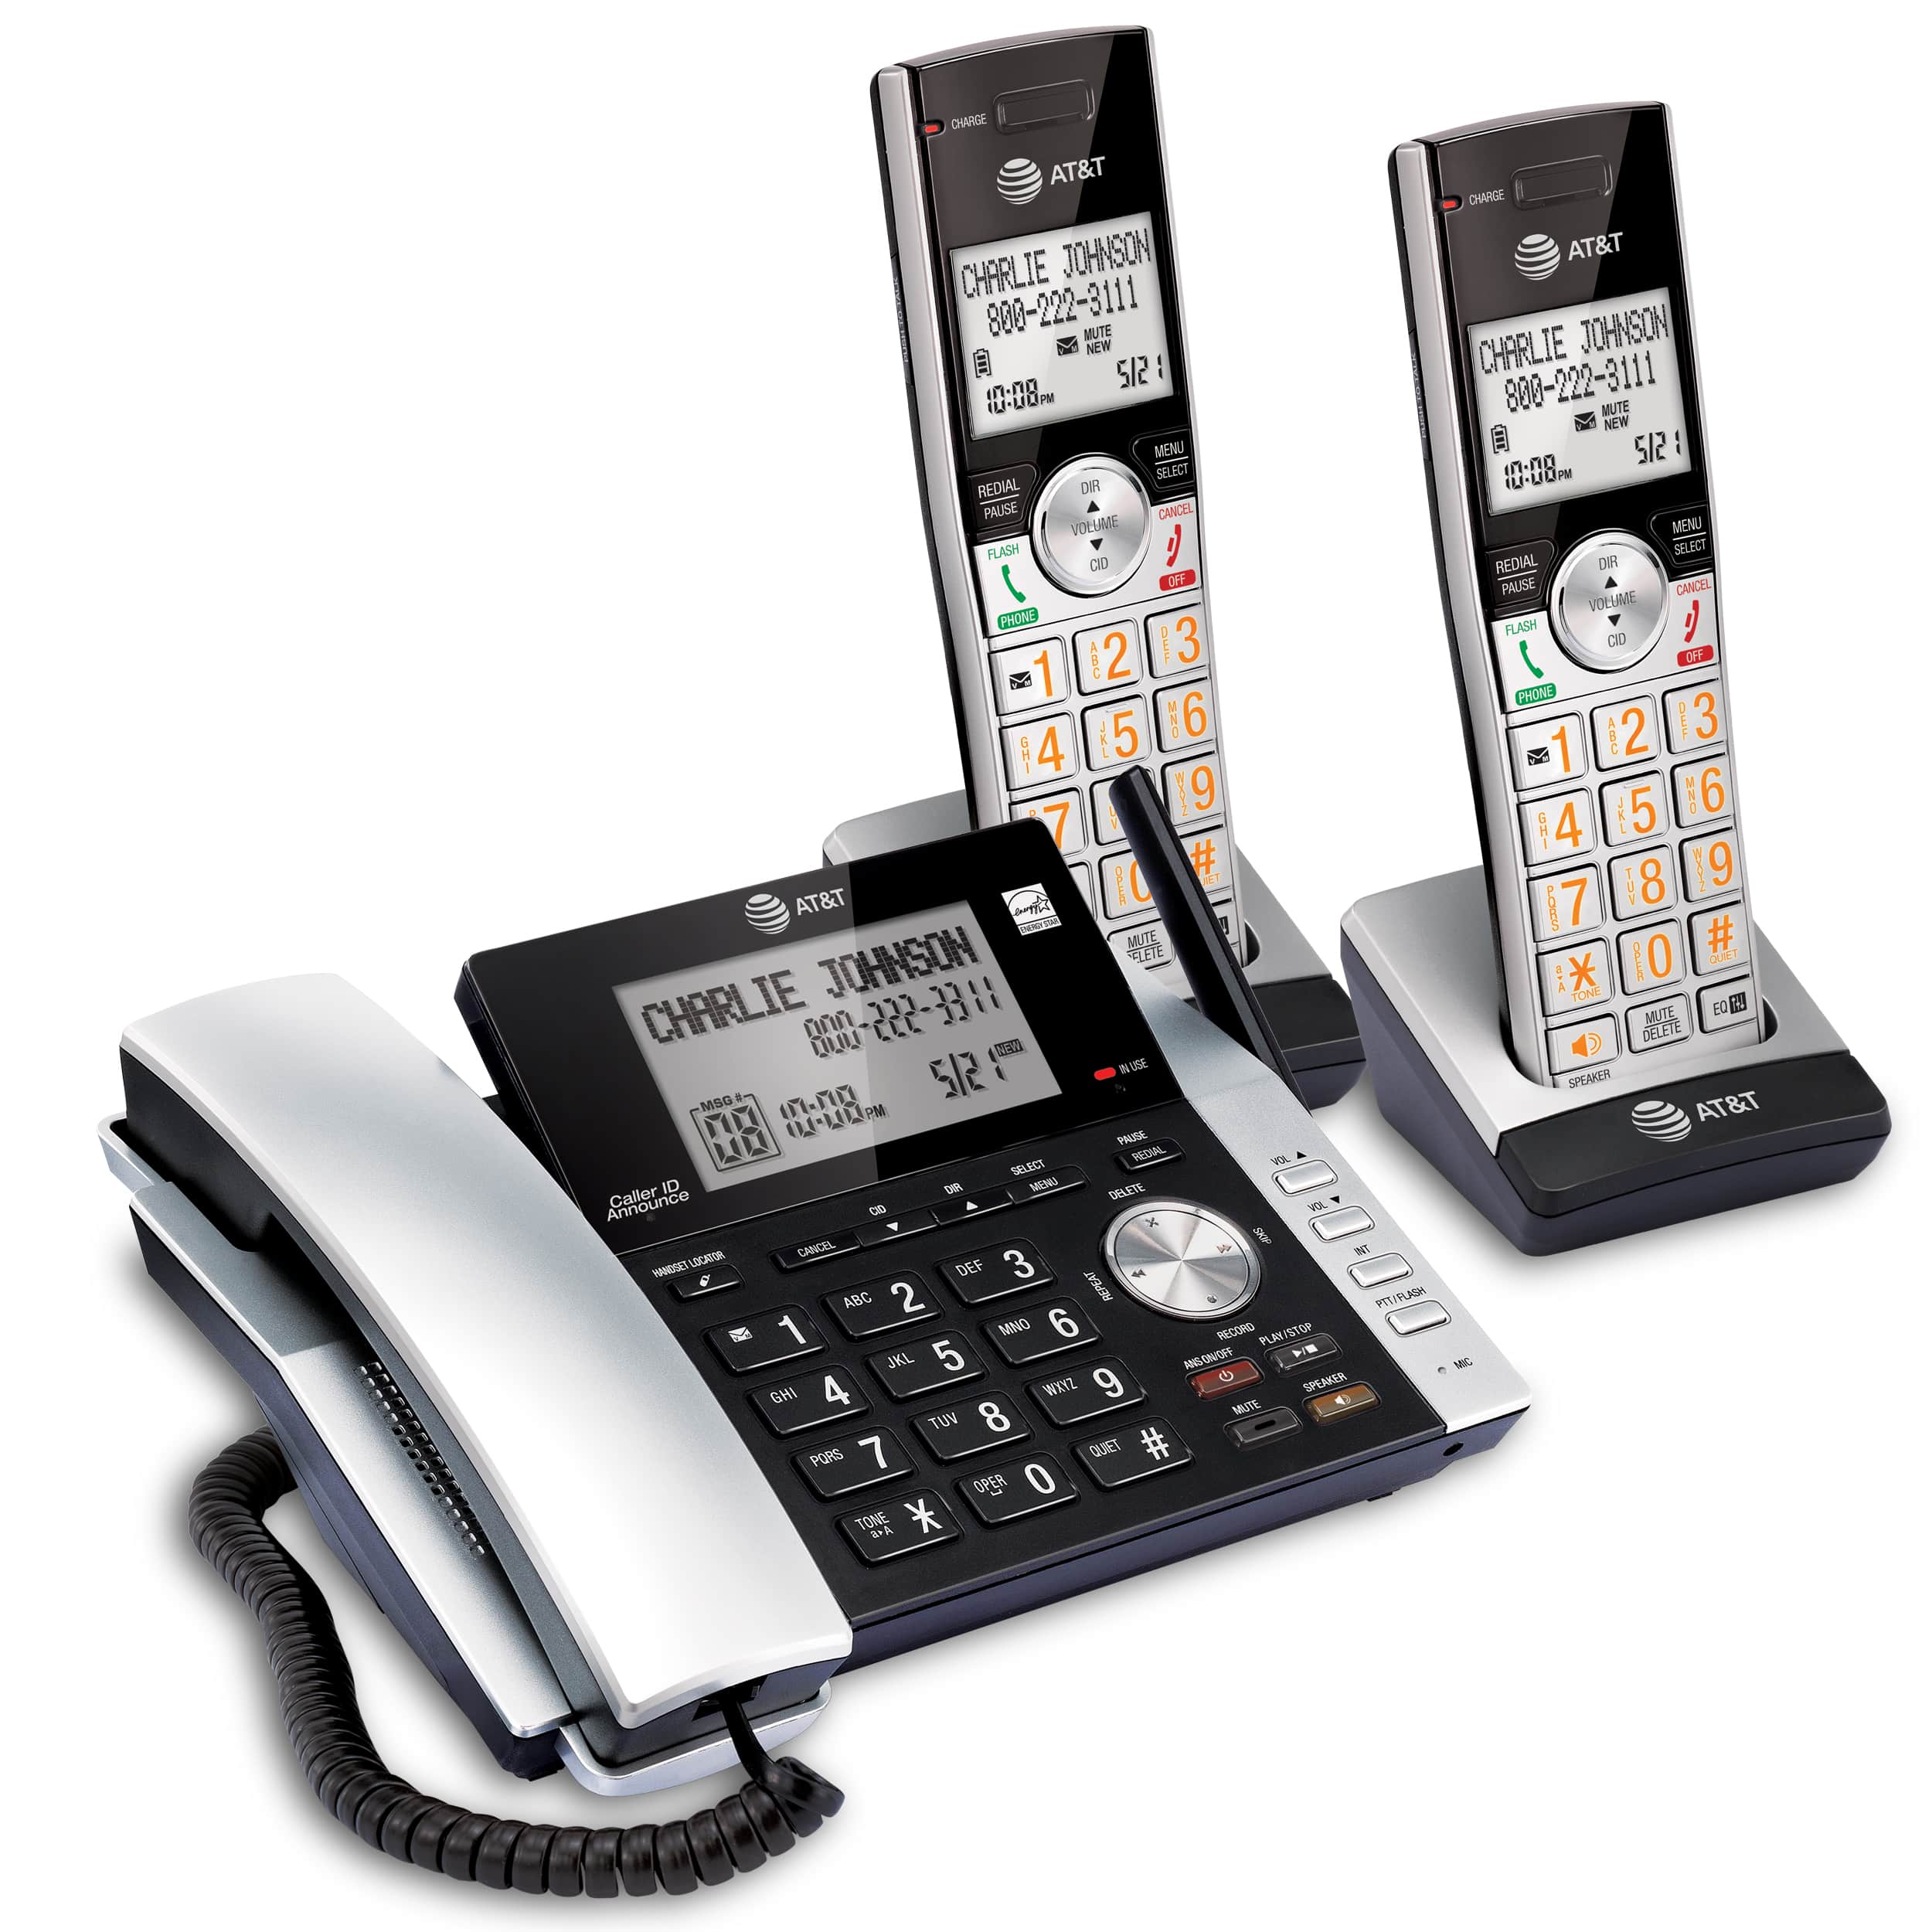 2 handset corded/cordless answering system with caller ID/call waiting - view 3